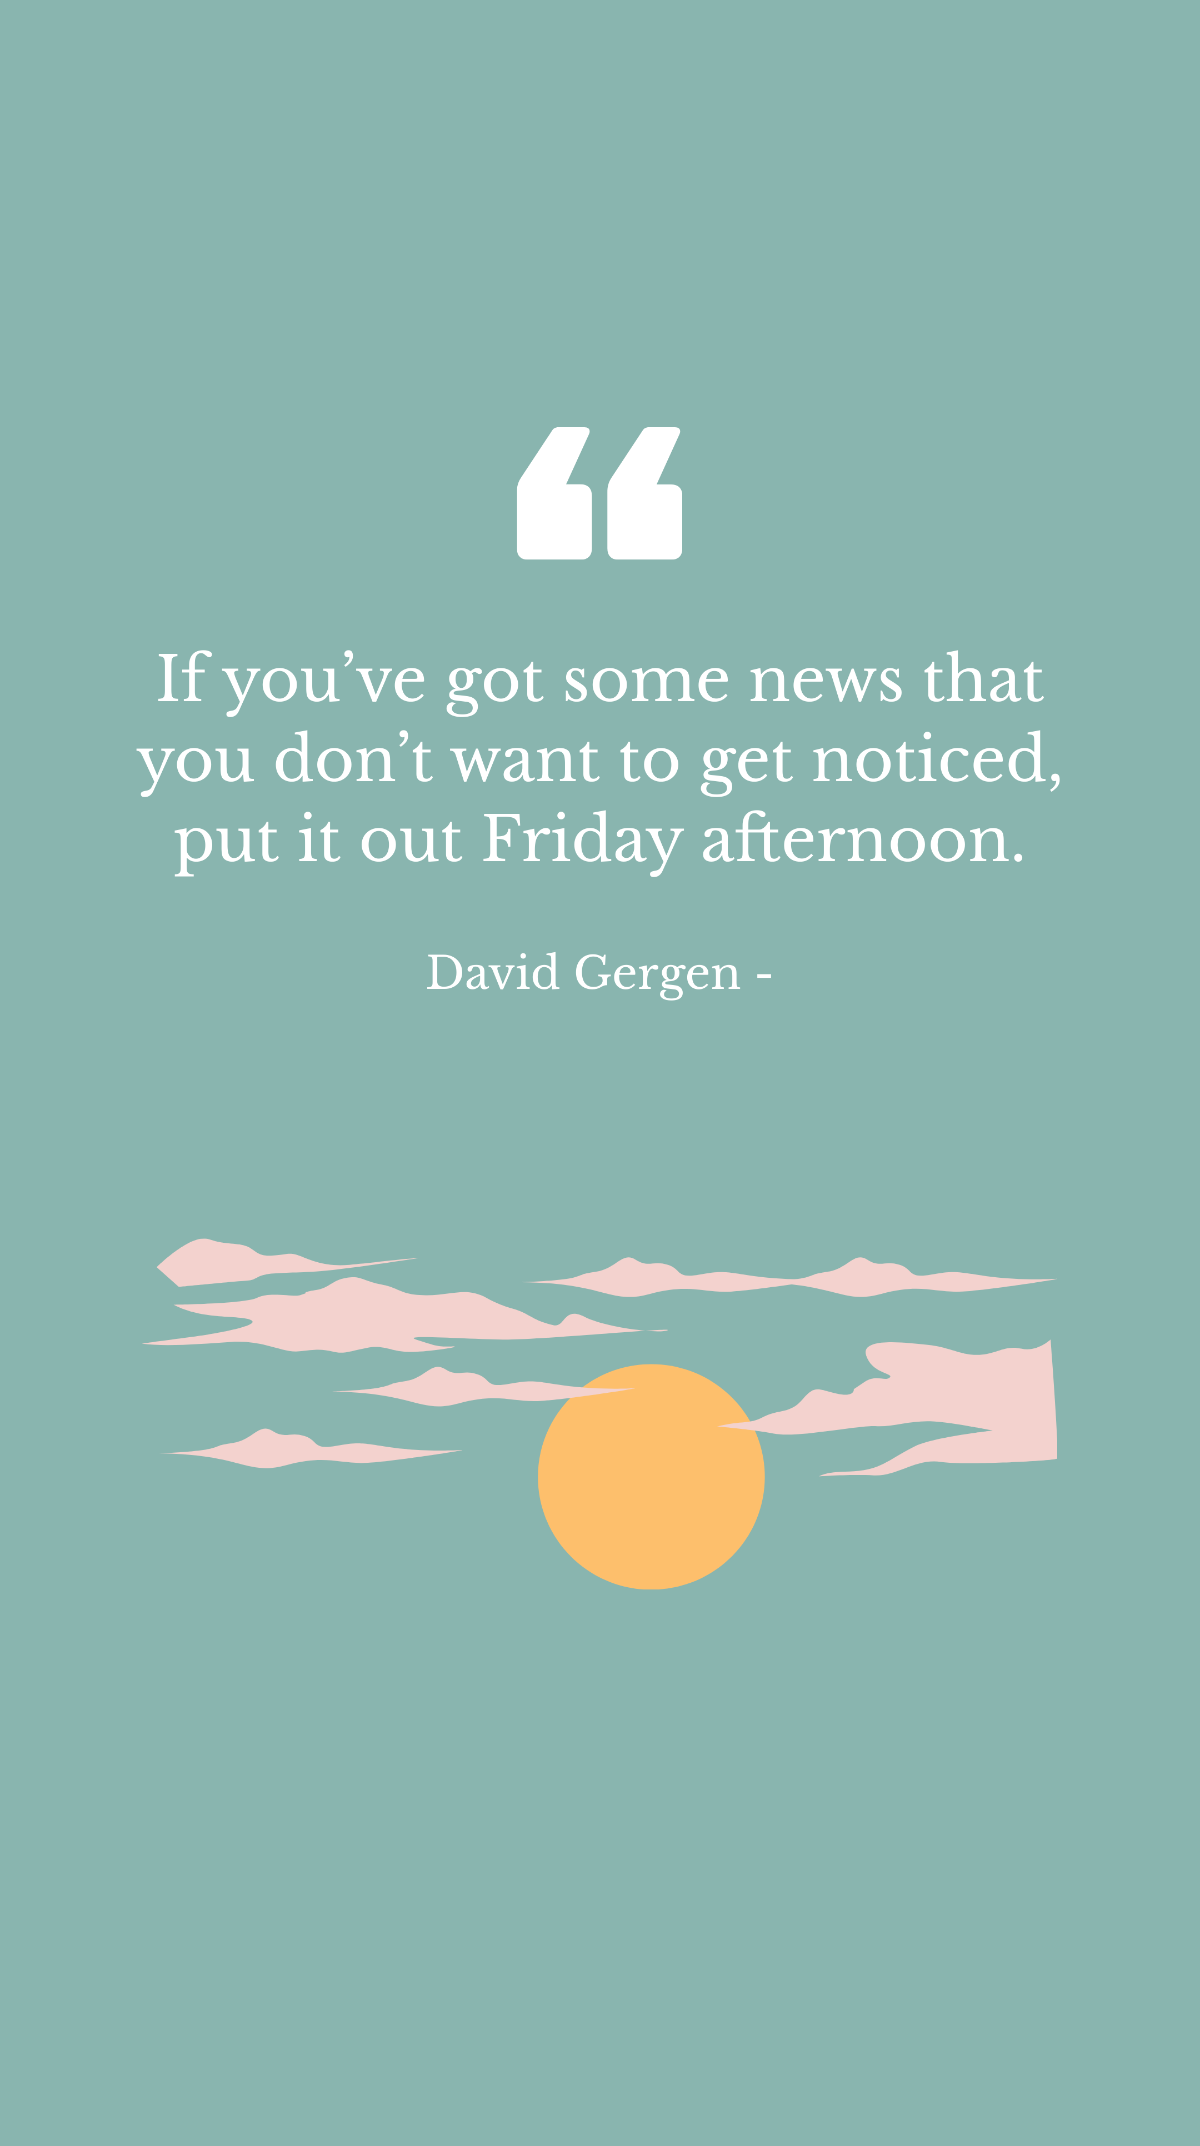 Free David Gergen - If you’ve got some news that you don’t want to get noticed, put it out Friday afternoon. Template